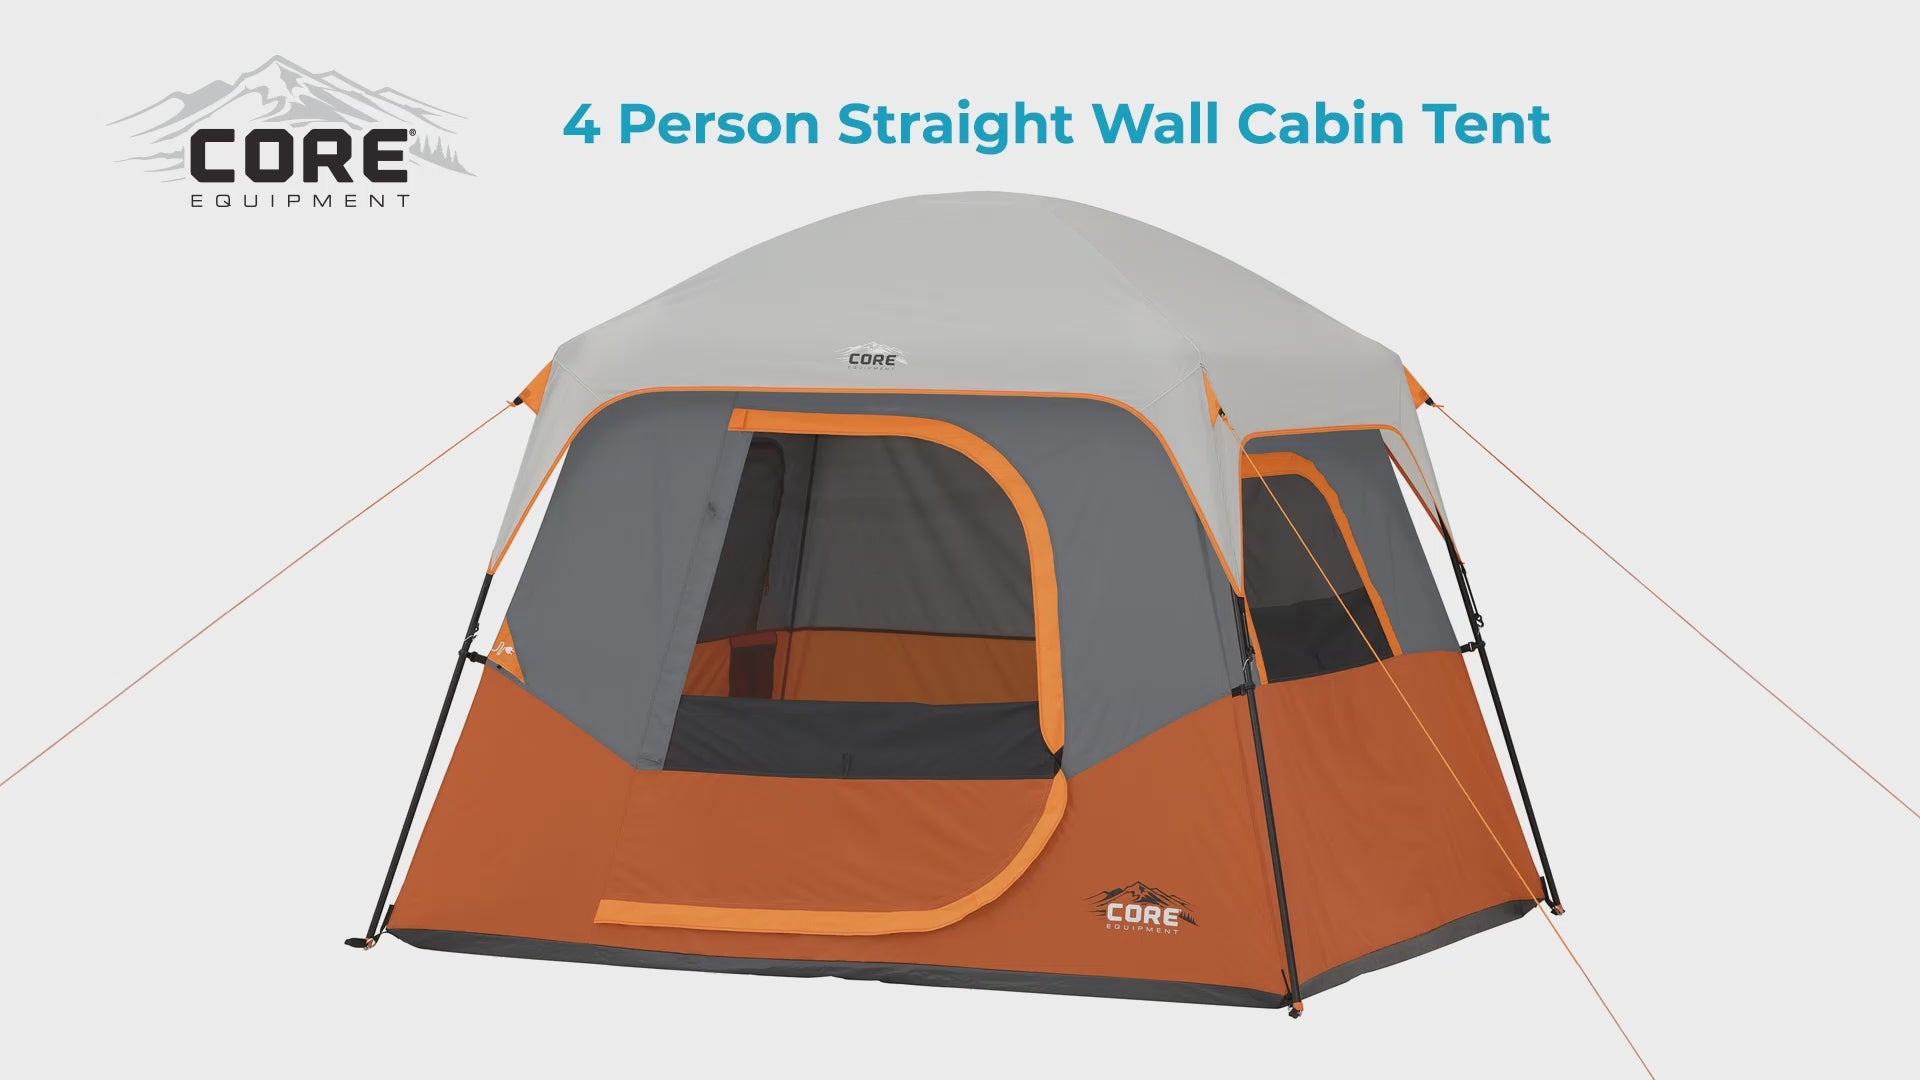 Core 4 person straight wall cabin tent - Matthews Auctioneers